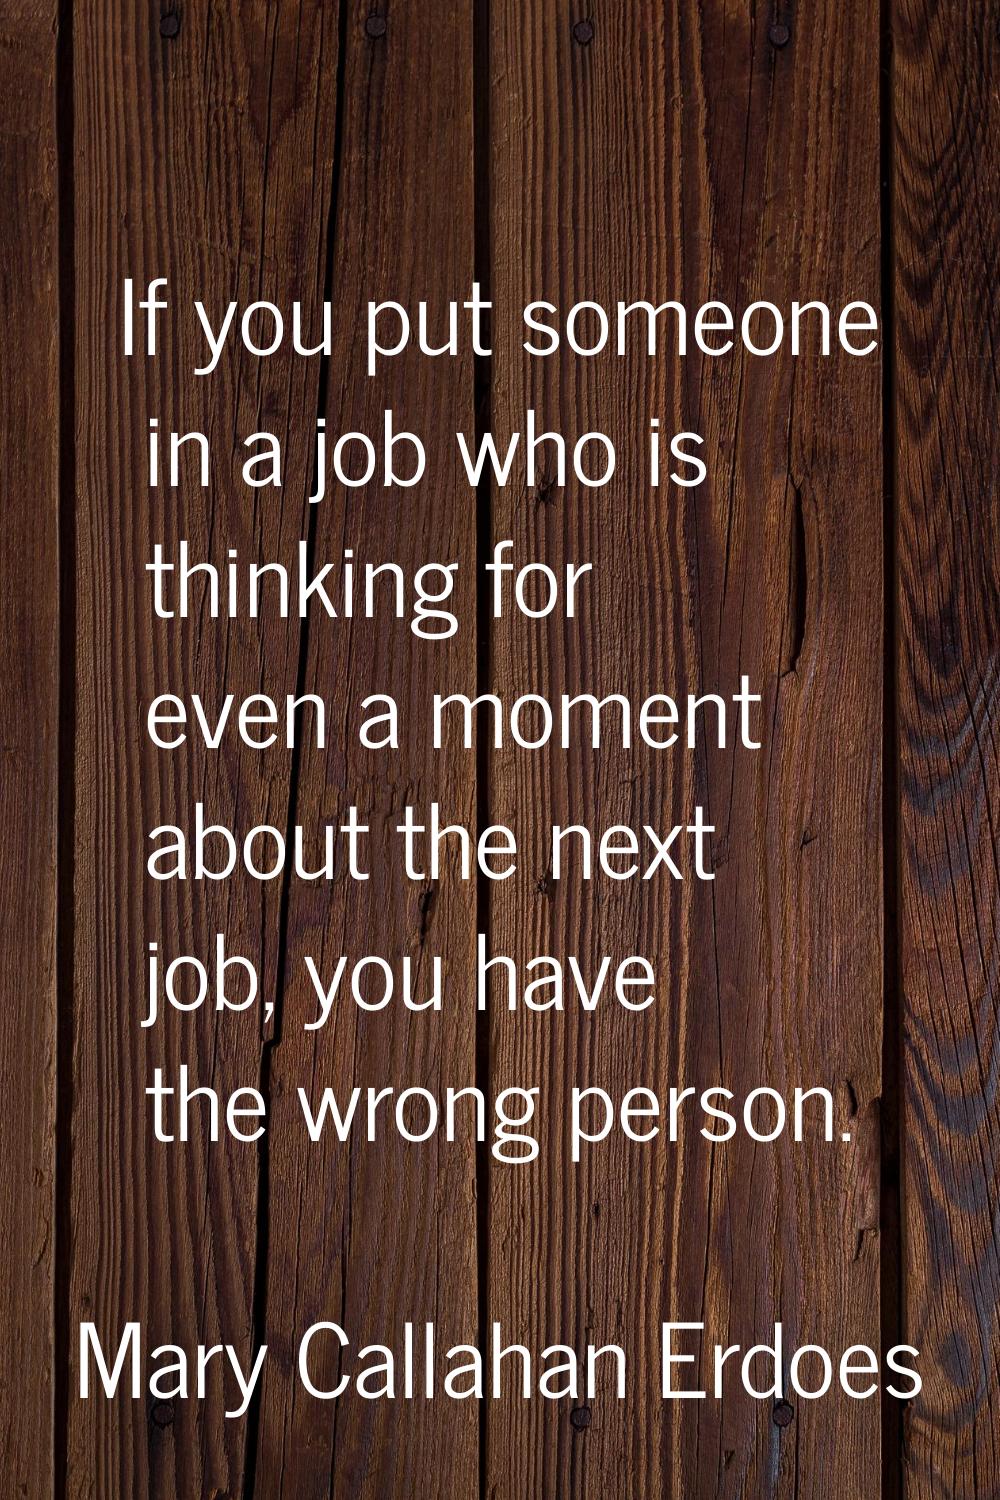 If you put someone in a job who is thinking for even a moment about the next job, you have the wron